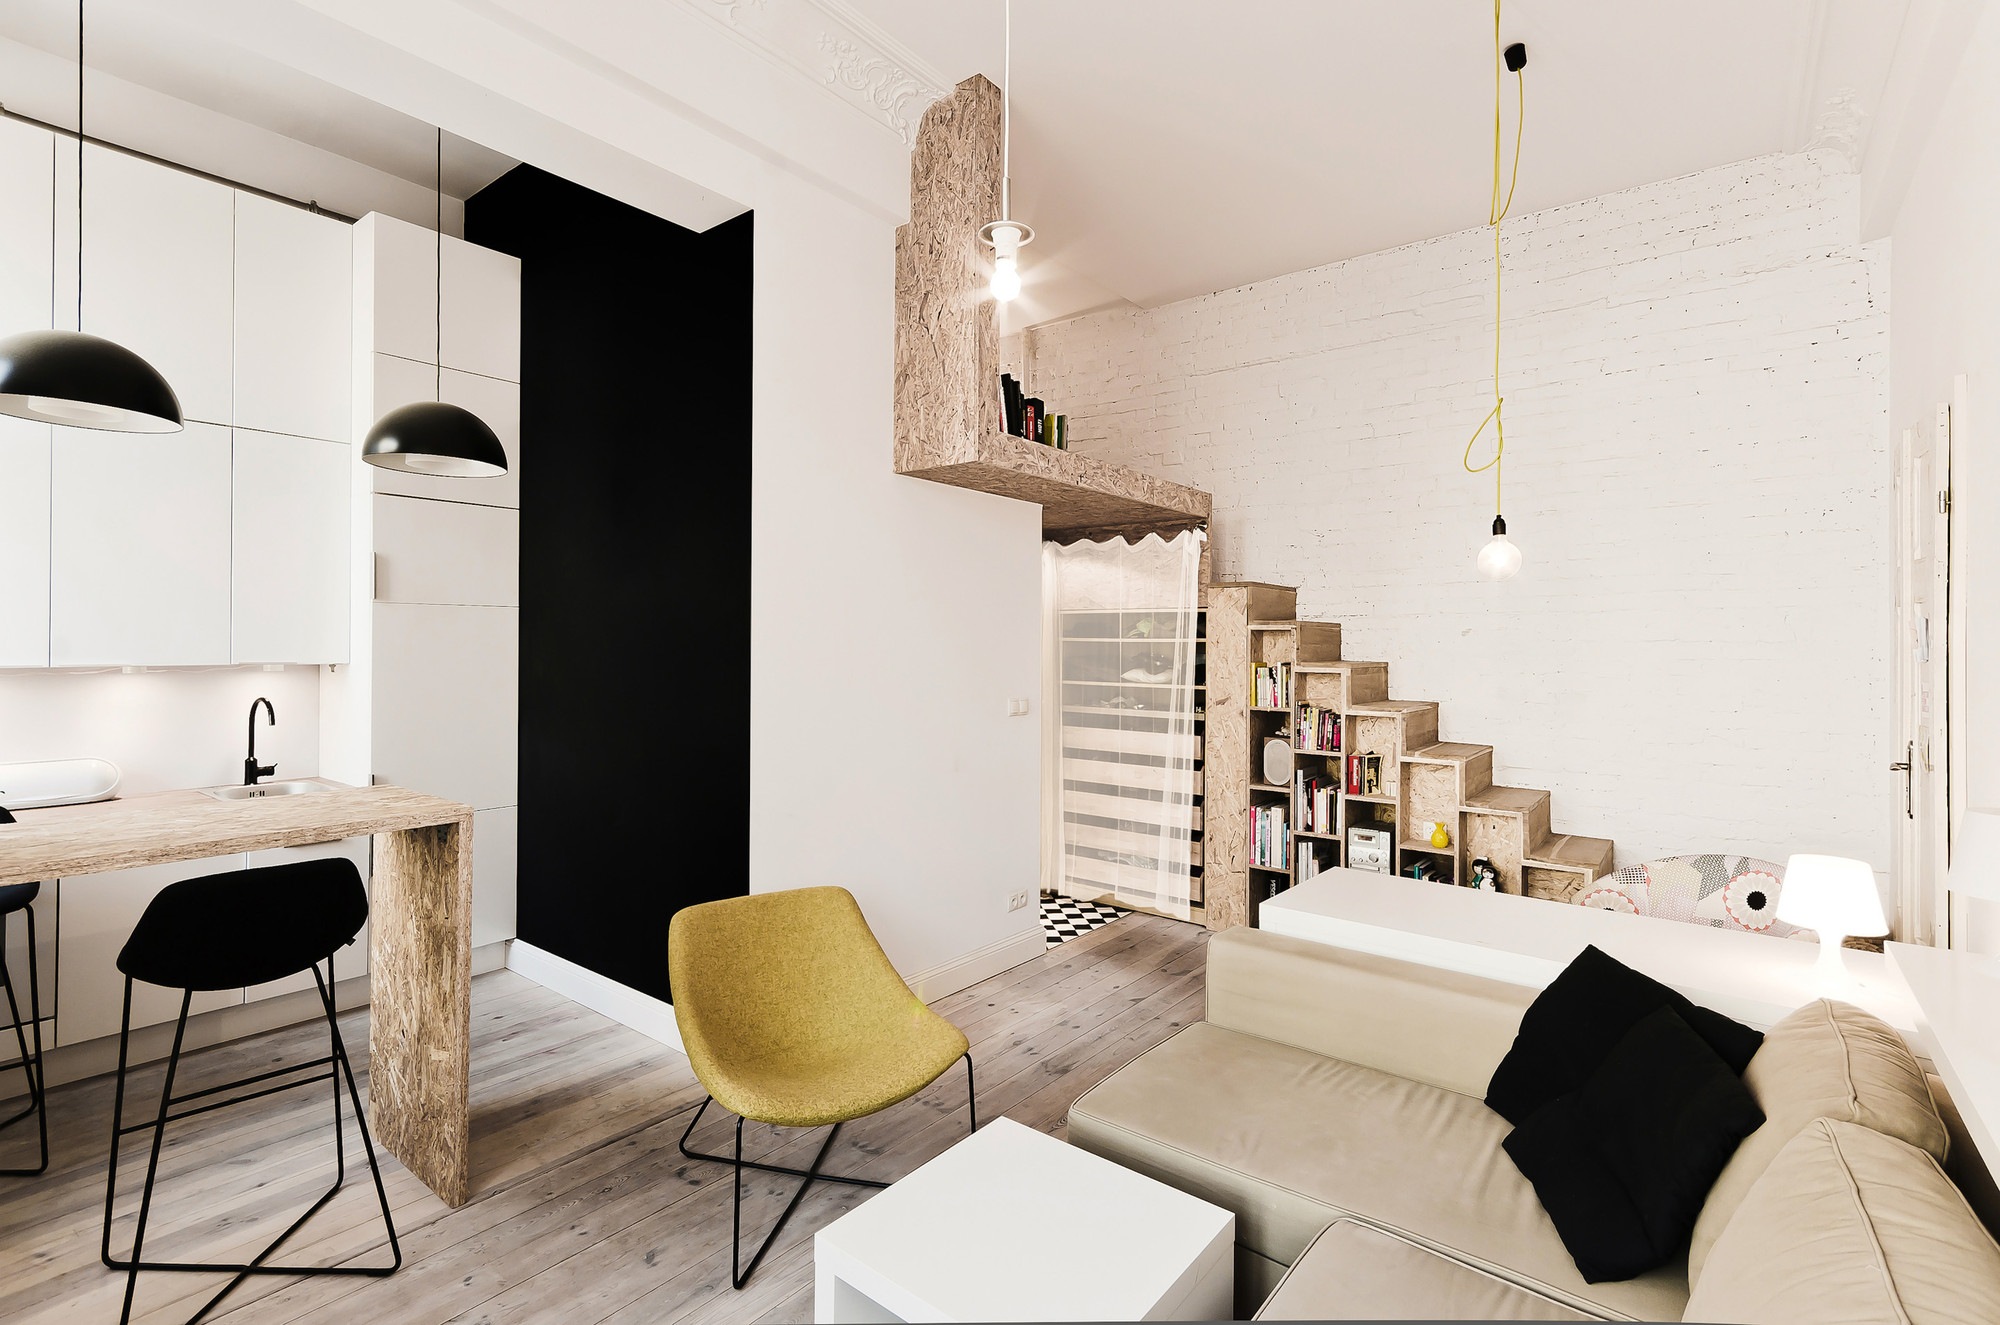 29 sqm 3xa 3 OSB Was Used To Build a Mezzanine in This Tiny 29m² Apartment